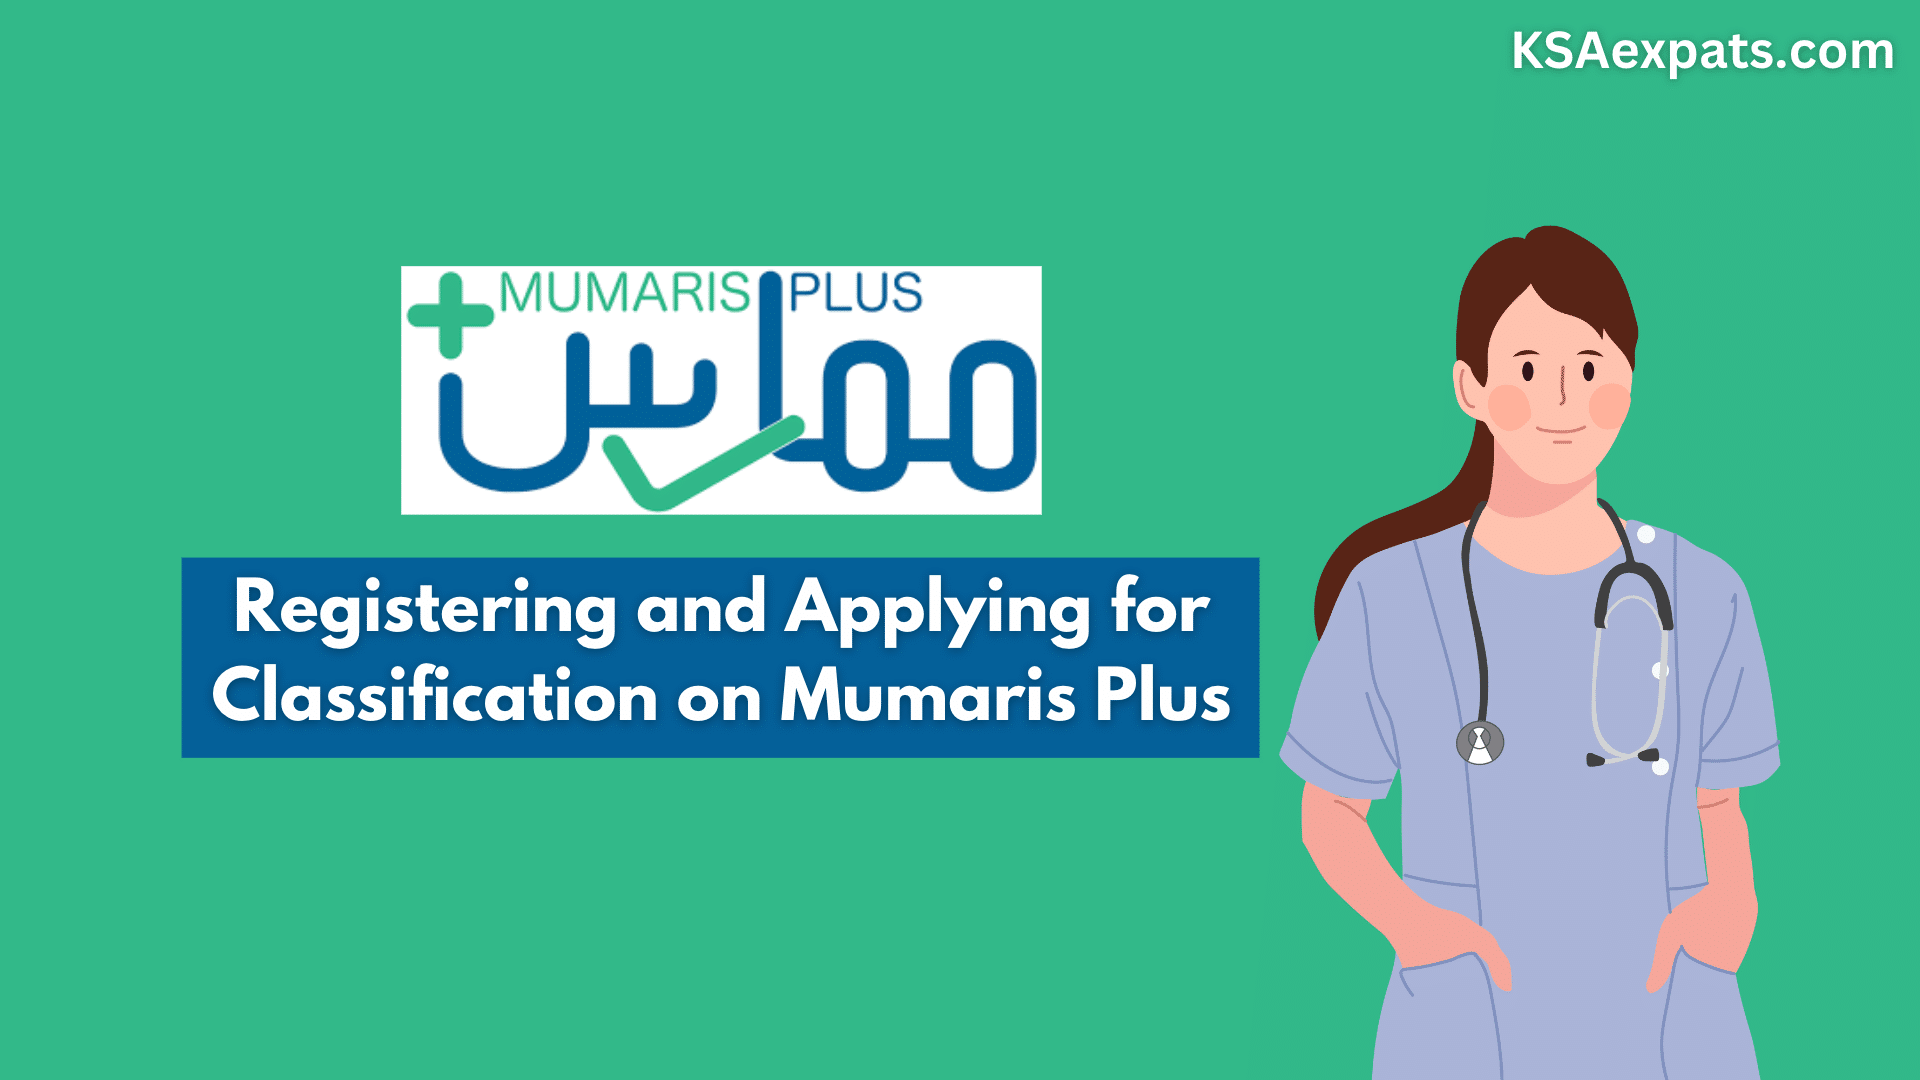 Registering and Applying for Classification on Mumaris Plus